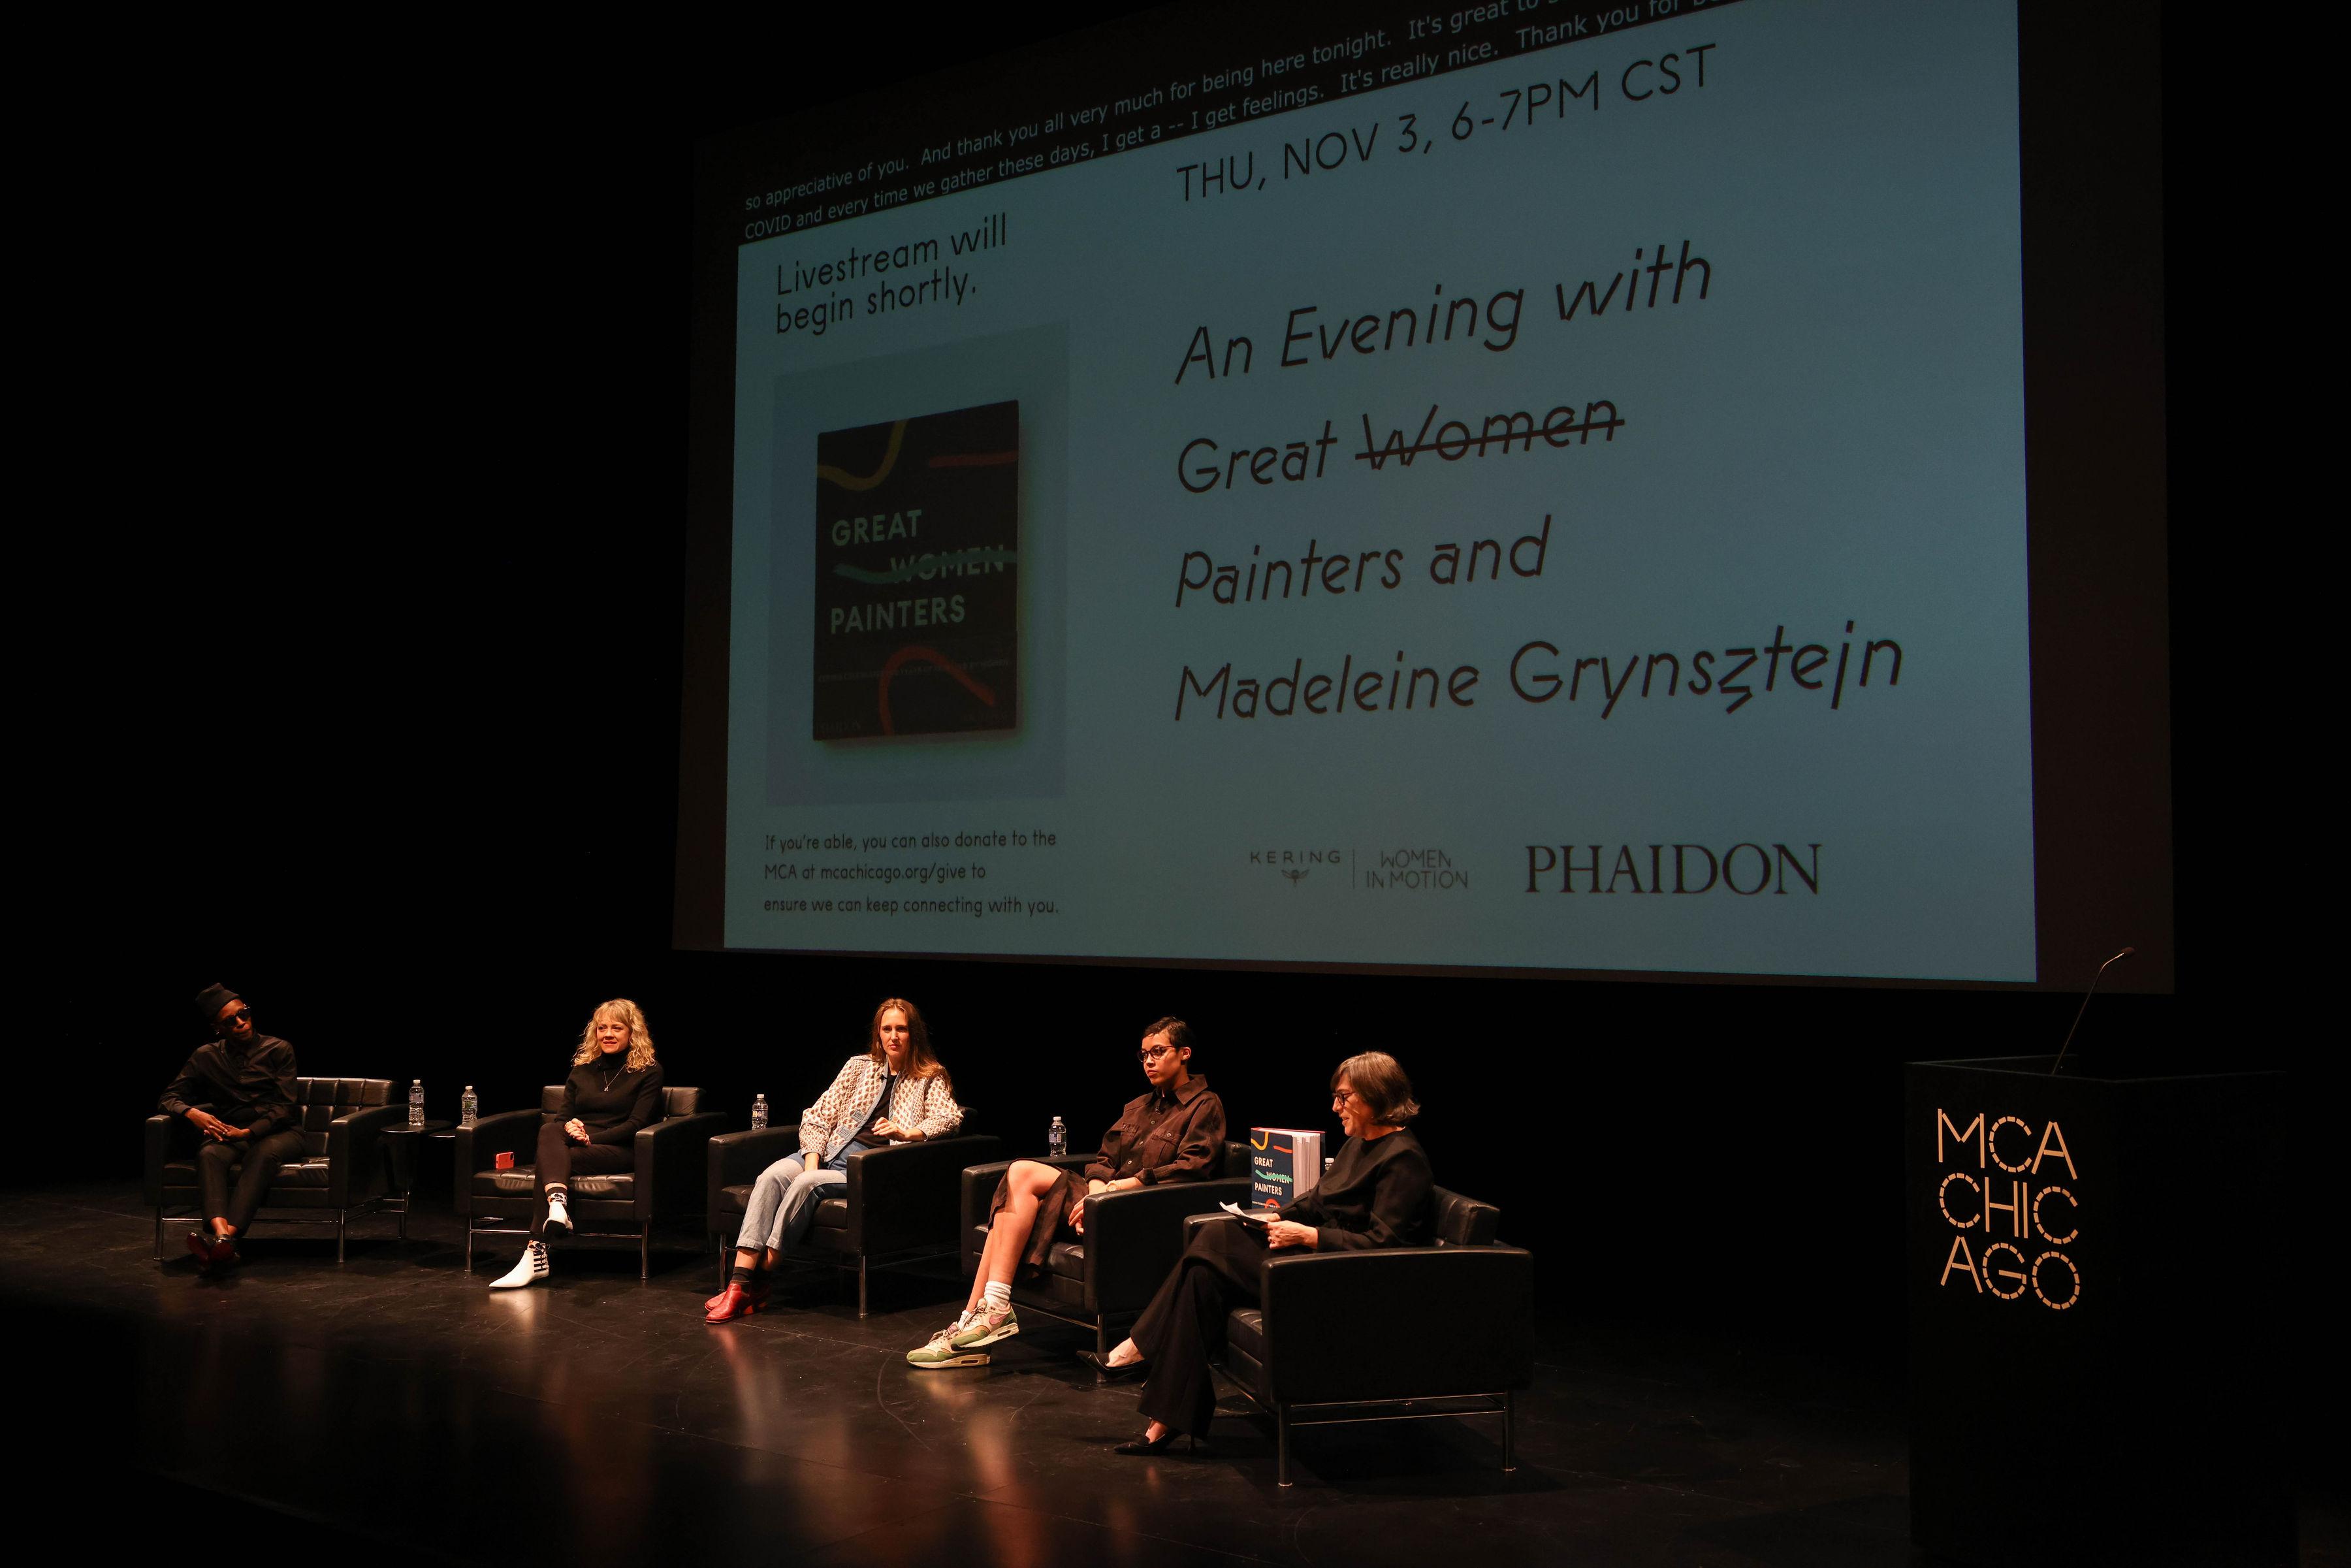 Panel seated for a talk in front of projection